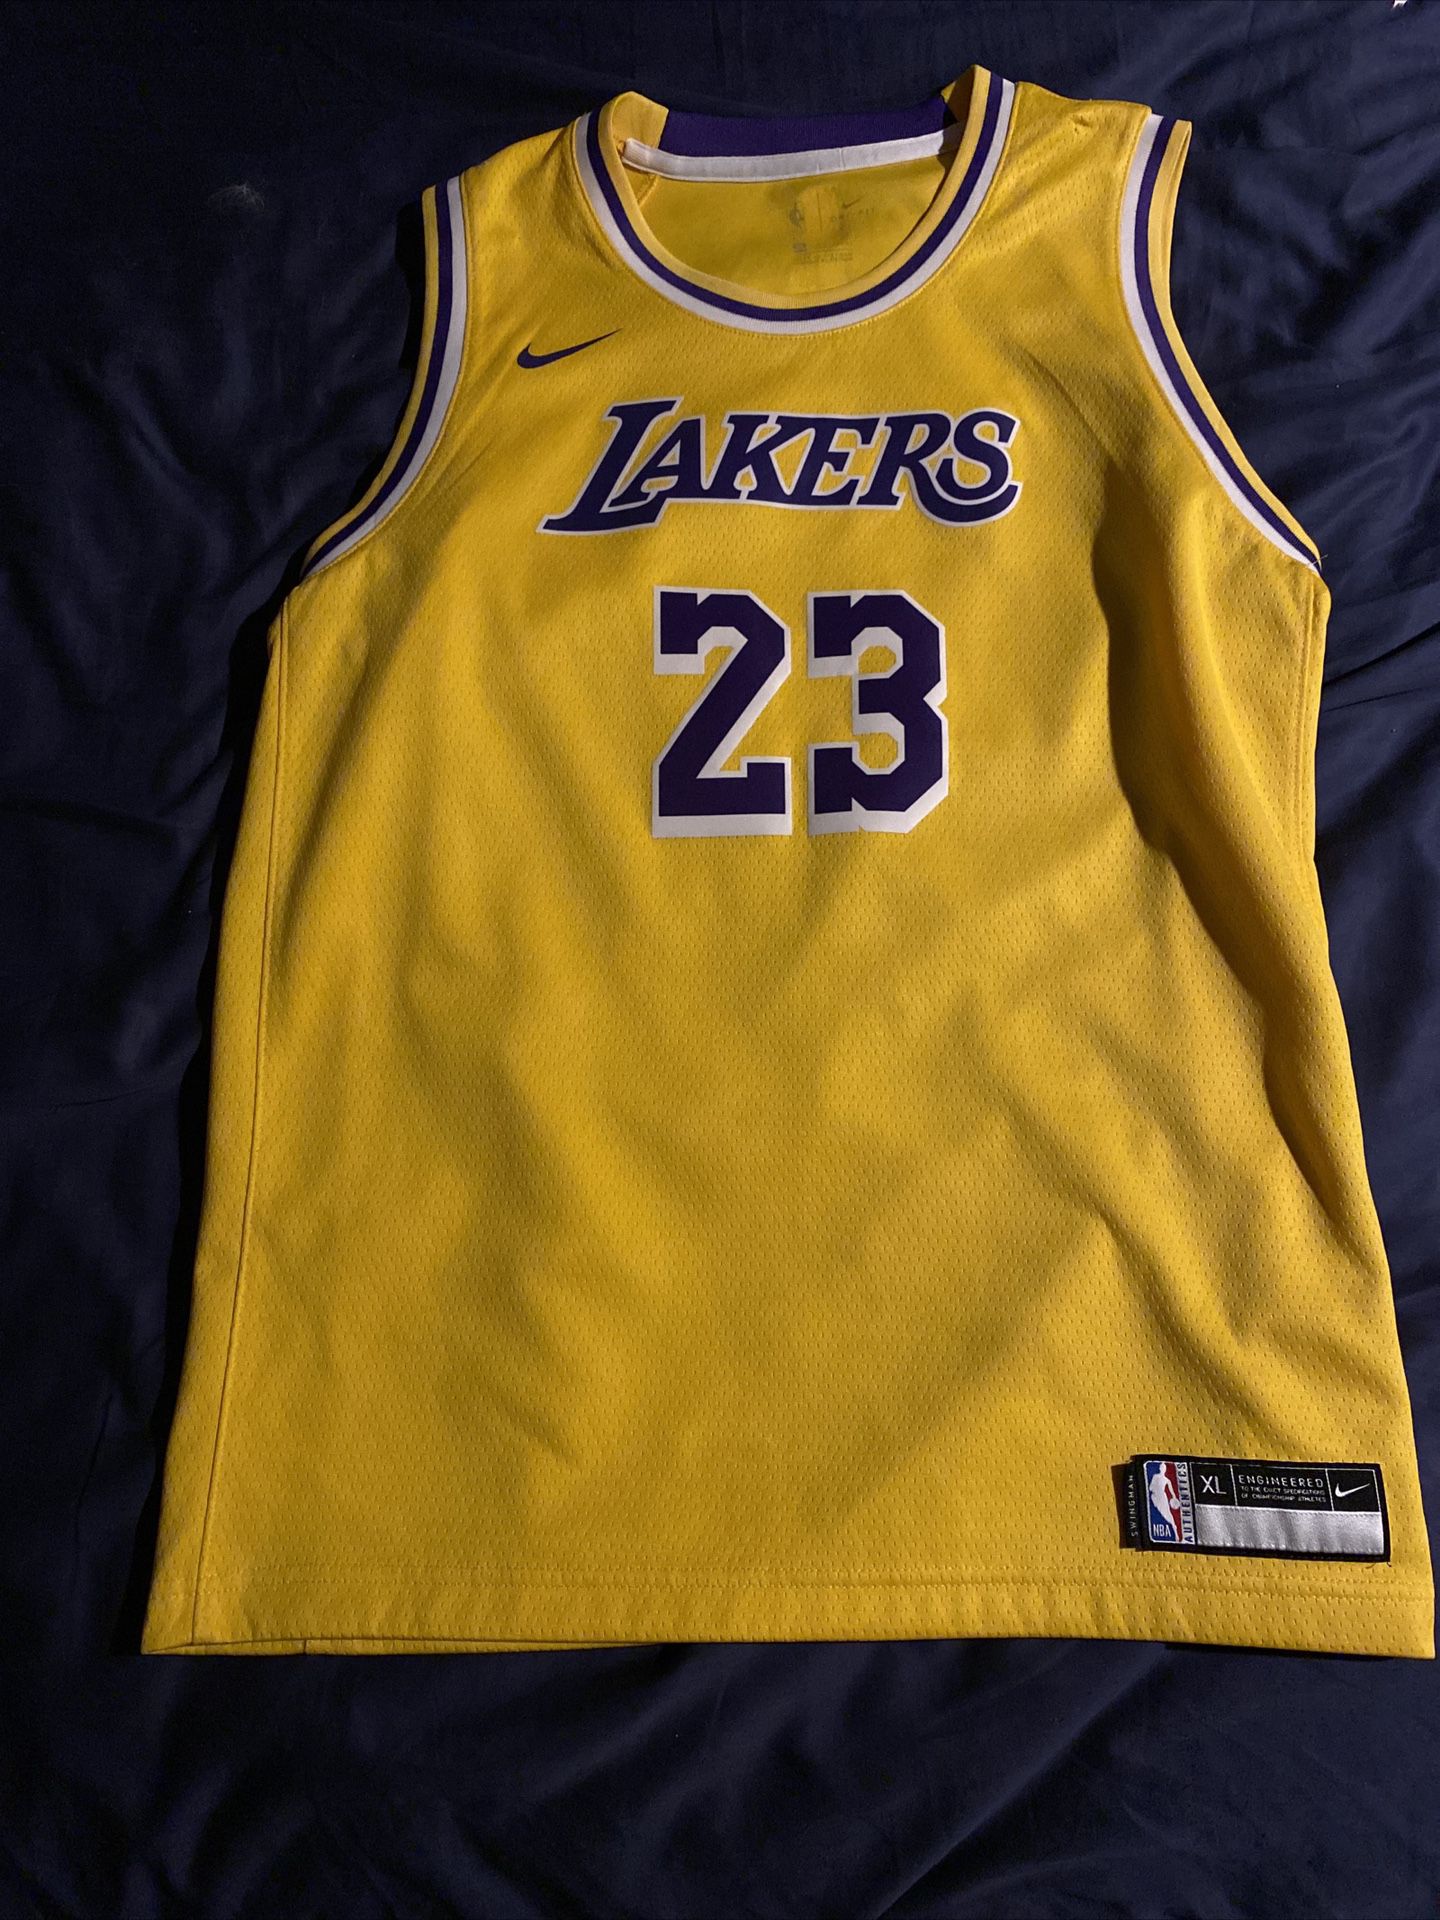 Youth XL Lebron James jersey for Sale in Franklin, NH - OfferUp